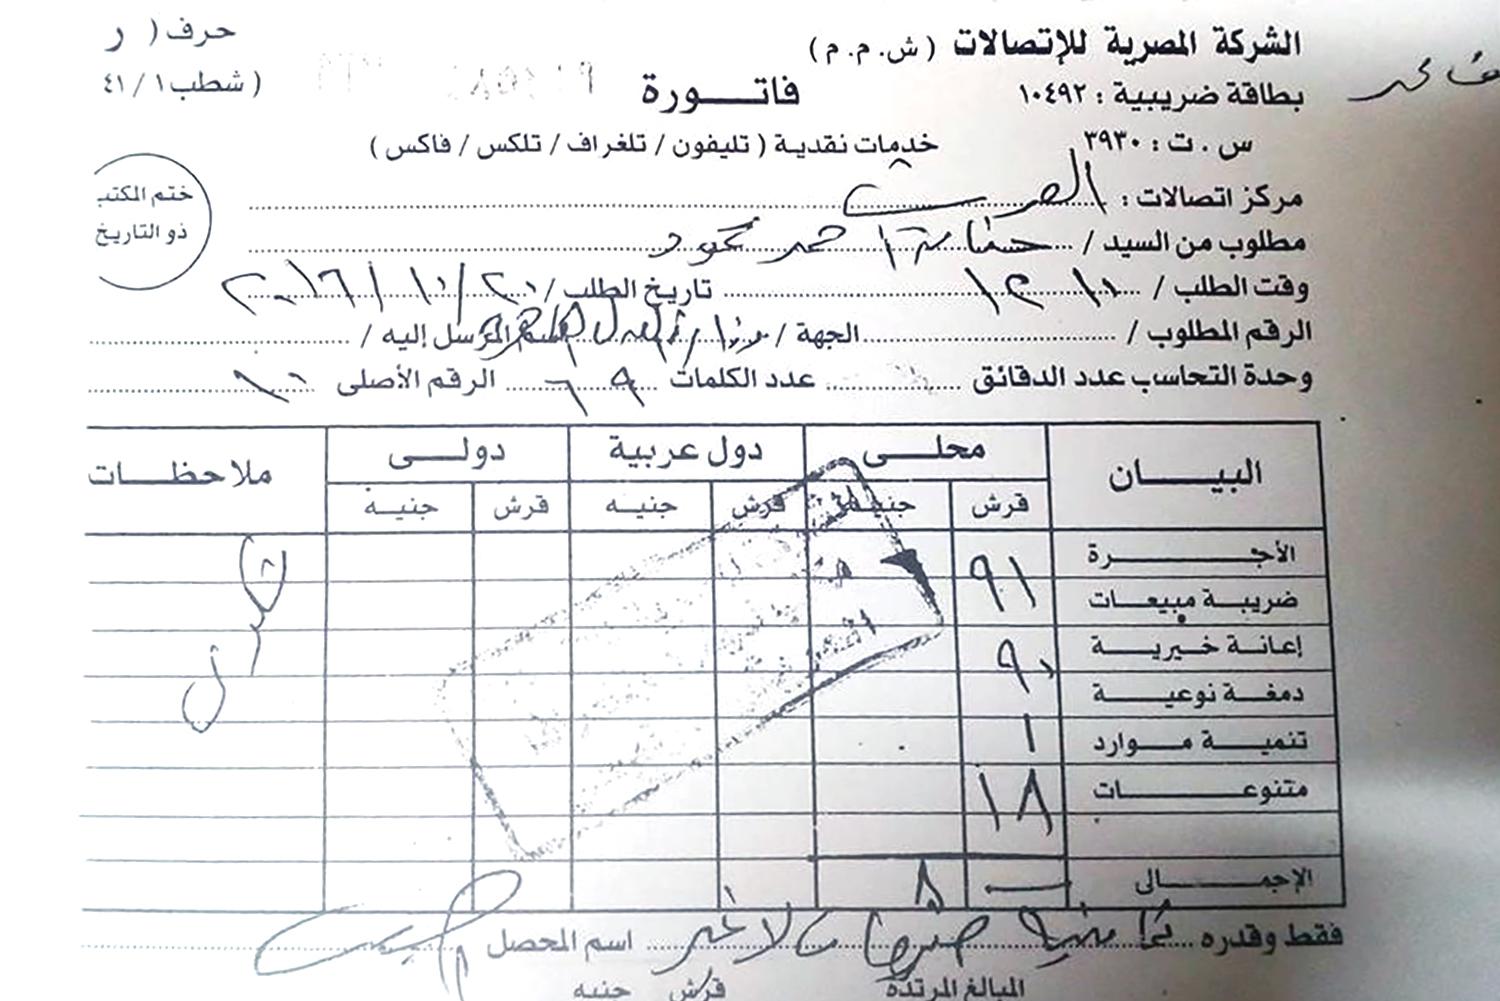 The family of Rashid said they sent a telegram to the prosecutor general on October 30, 2016, two weeks after his arrest, to find out what had happened to him. A receipt they provided to Human Rights Watch shows the handwritten date and a stamped serial n